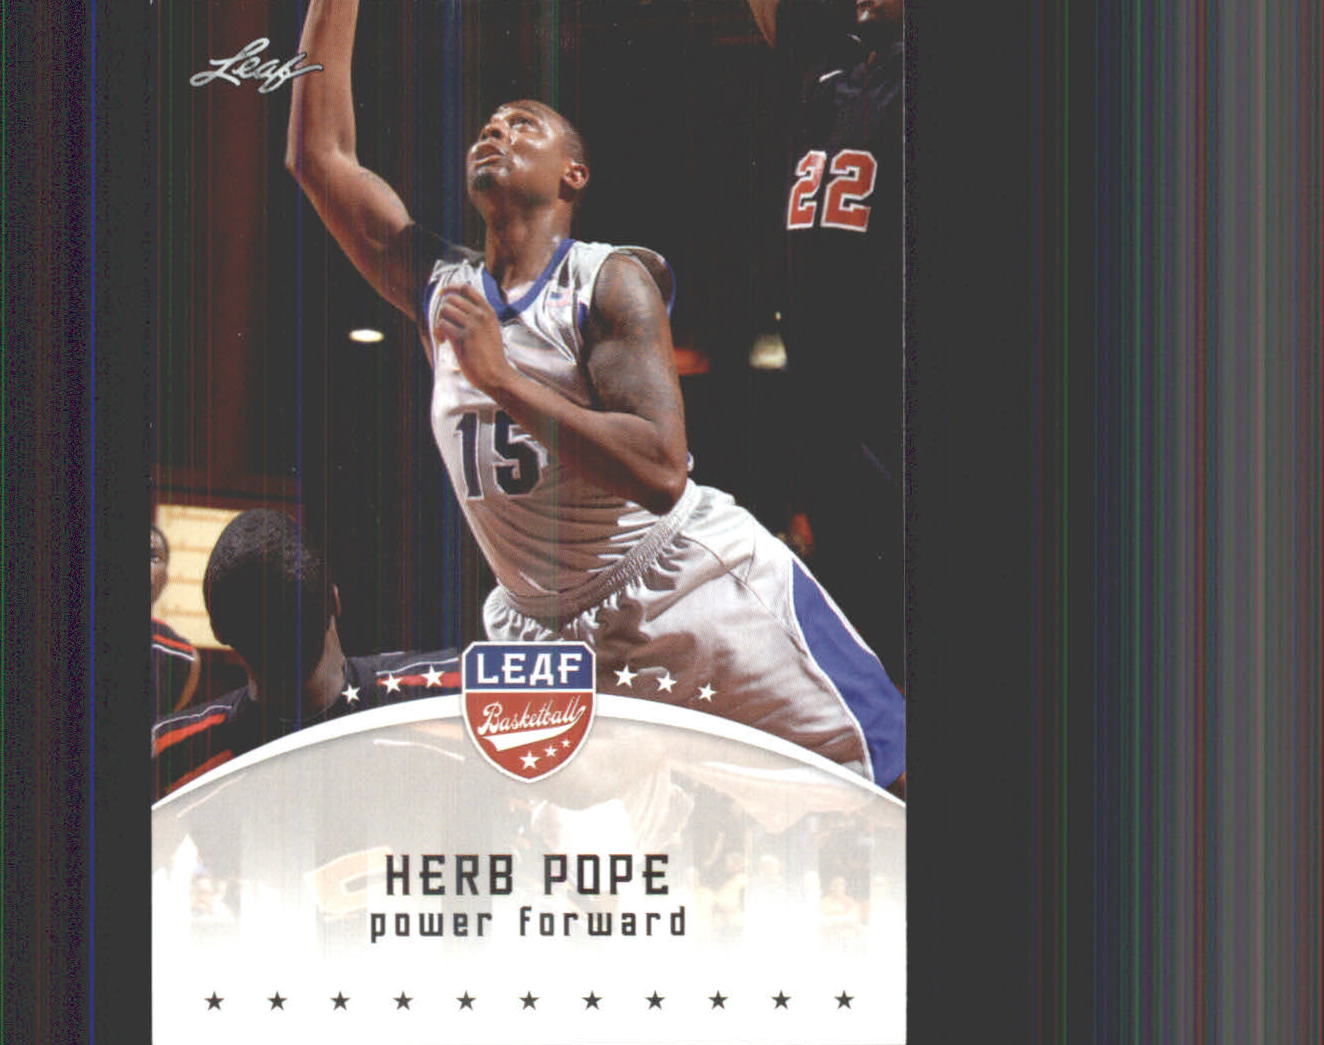  Herb Pope player image